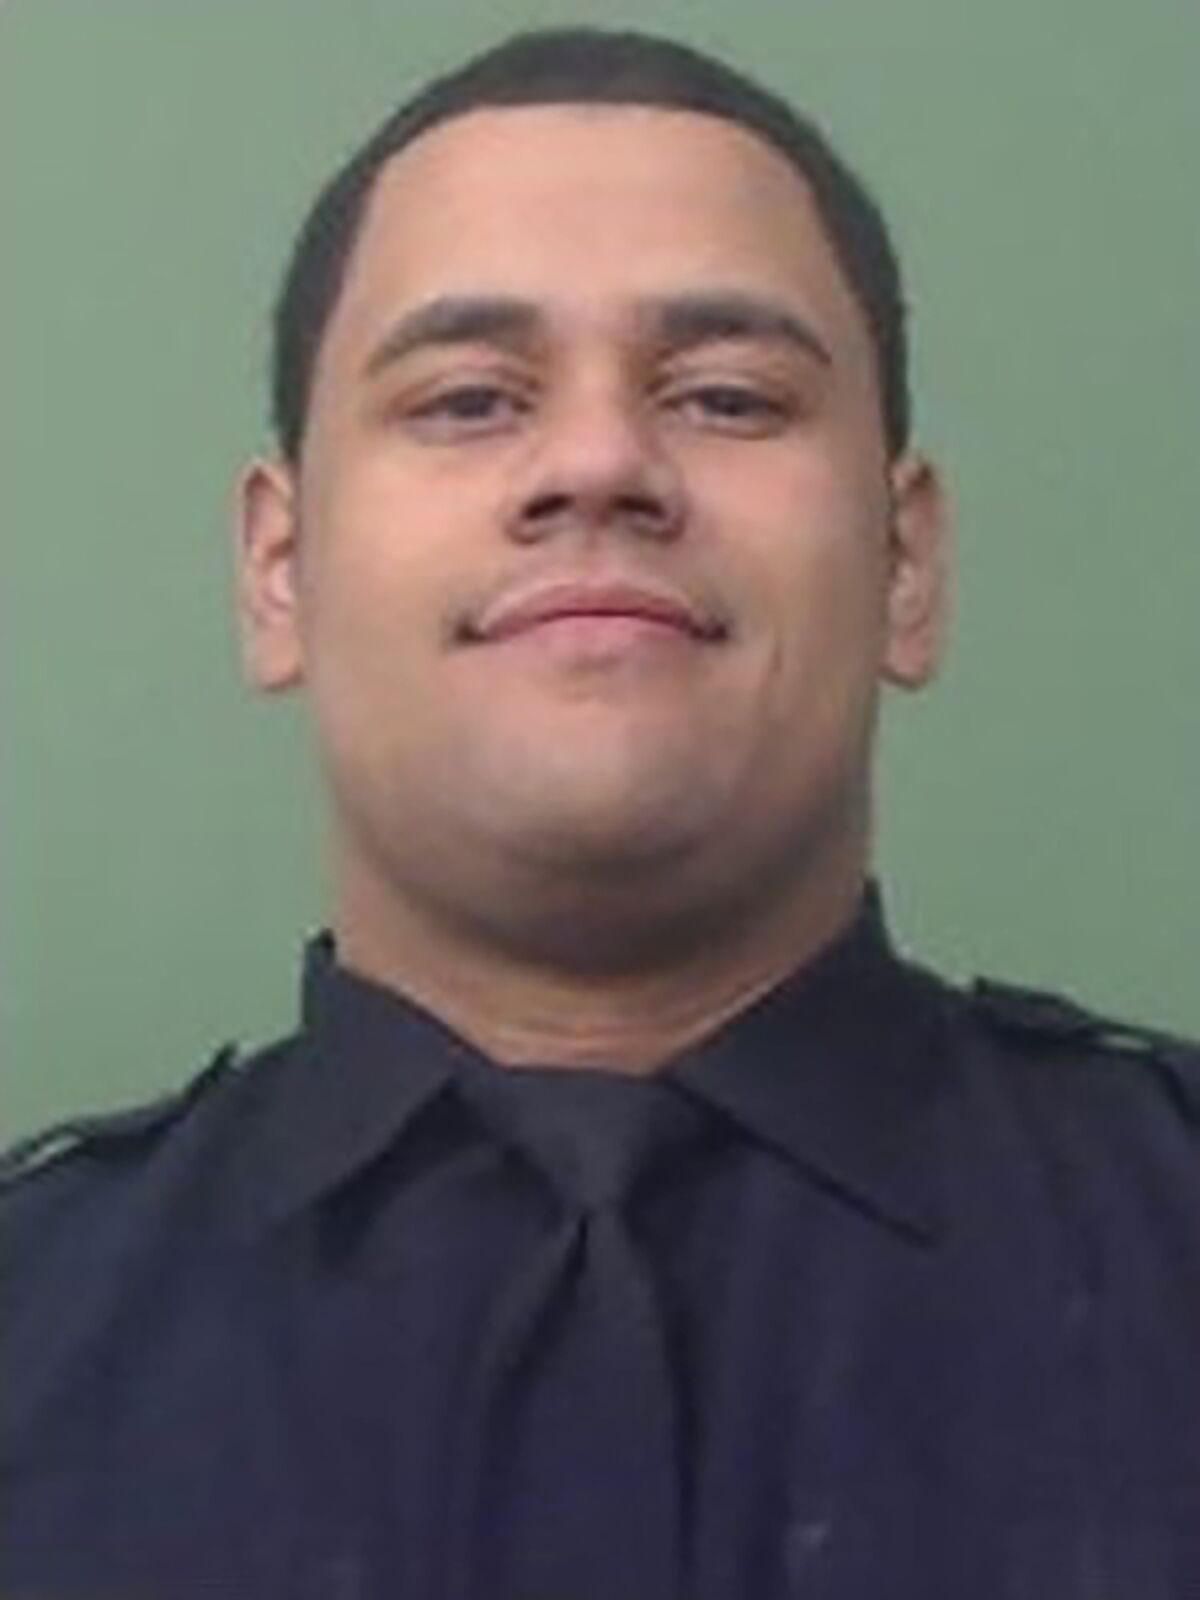 New York Police Department officer Wilbert Mora smiles while in uniform